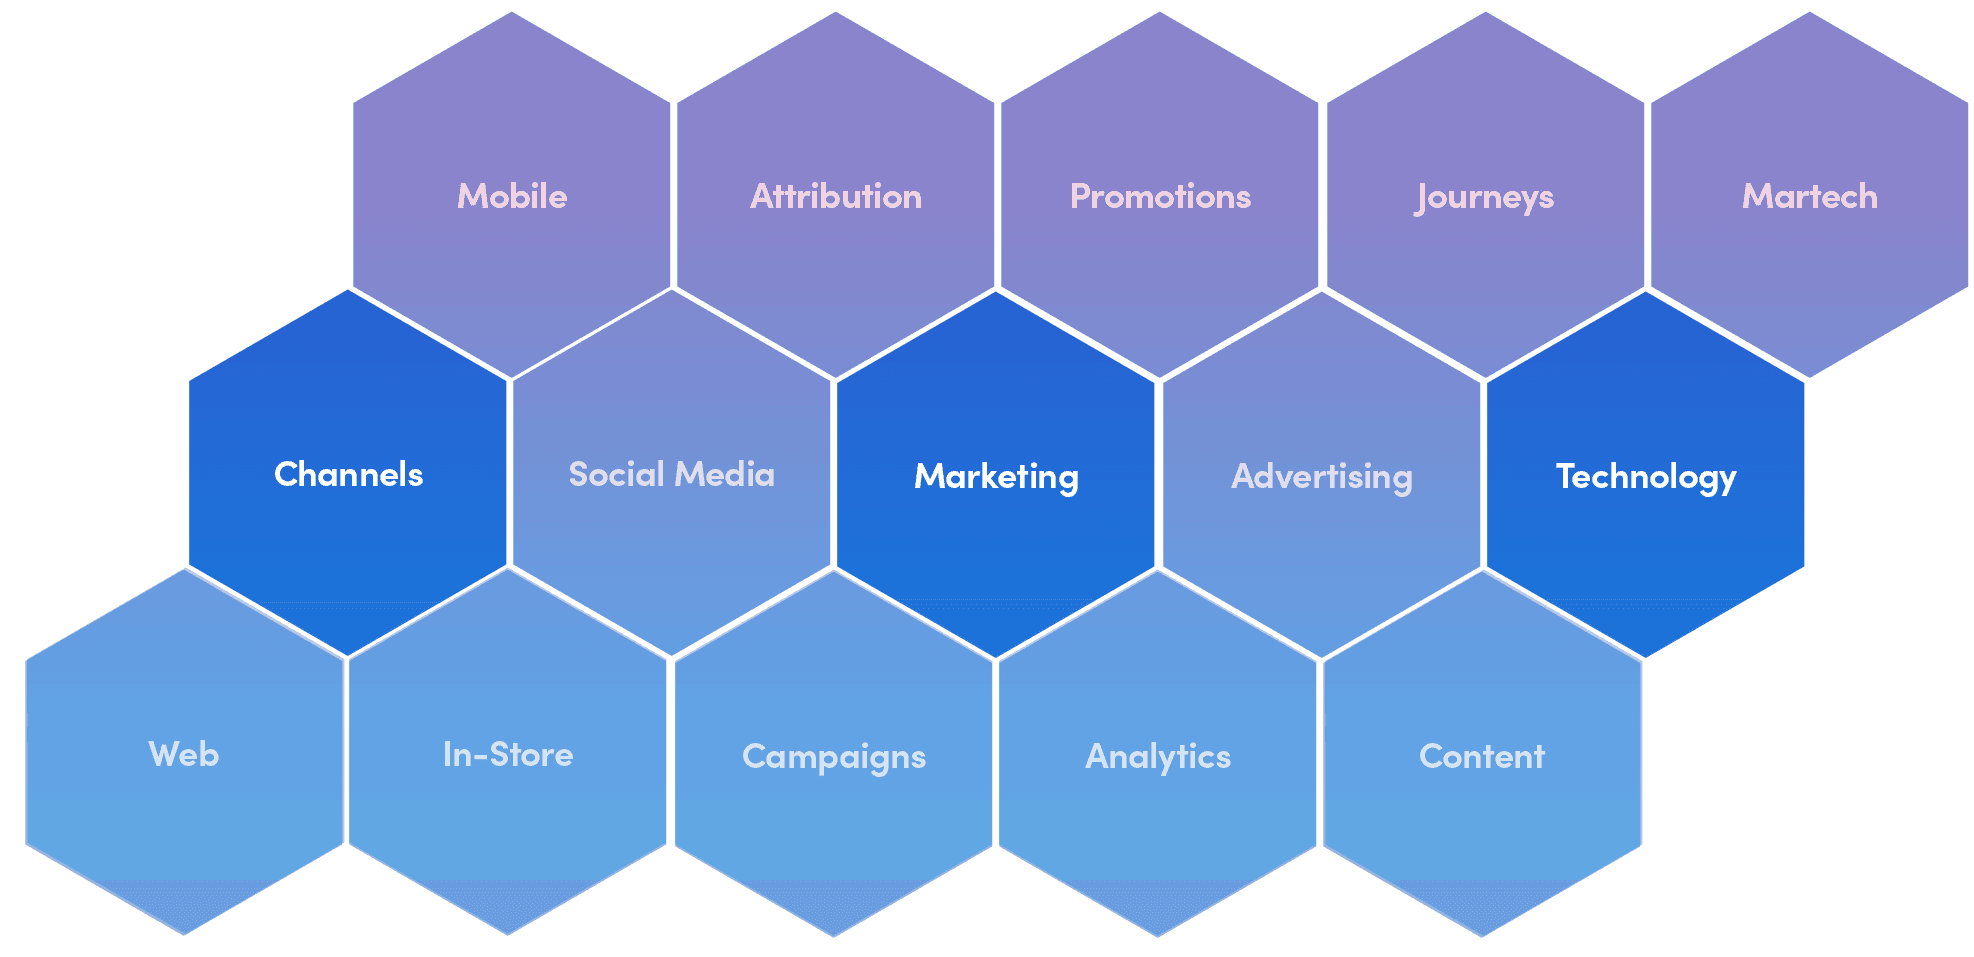 An infographic filled with purple and blue hexagons. Each hexagon represents a multi-channel approach to commerce including marketing, in-store, web, technology, and Martech among others.